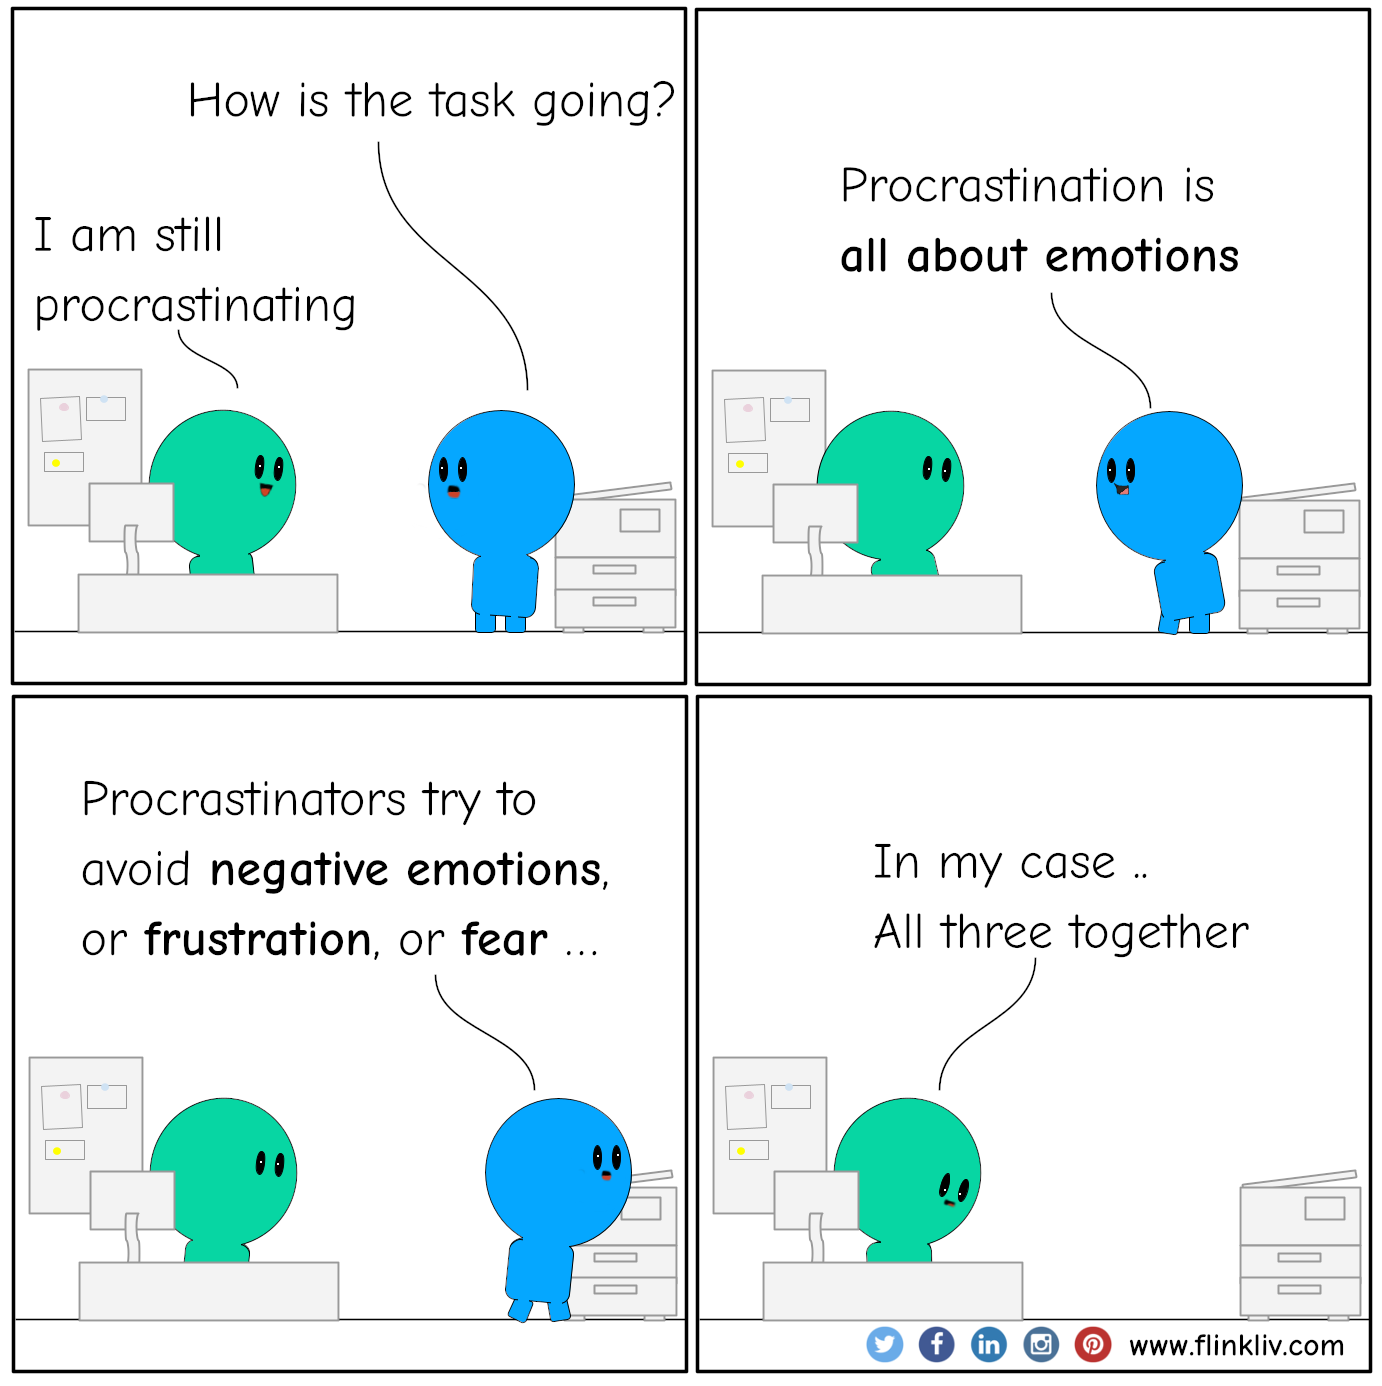 Conversation between A and B about procrastination.
								B: how is the report going?
								A: not even started
								B: This is procrastination
								B: Procrastination is all about emotions. Procrastinators try to avoid negative emotions, or frustration, or fear … 
								A: In my case ..  
								All three together 

							